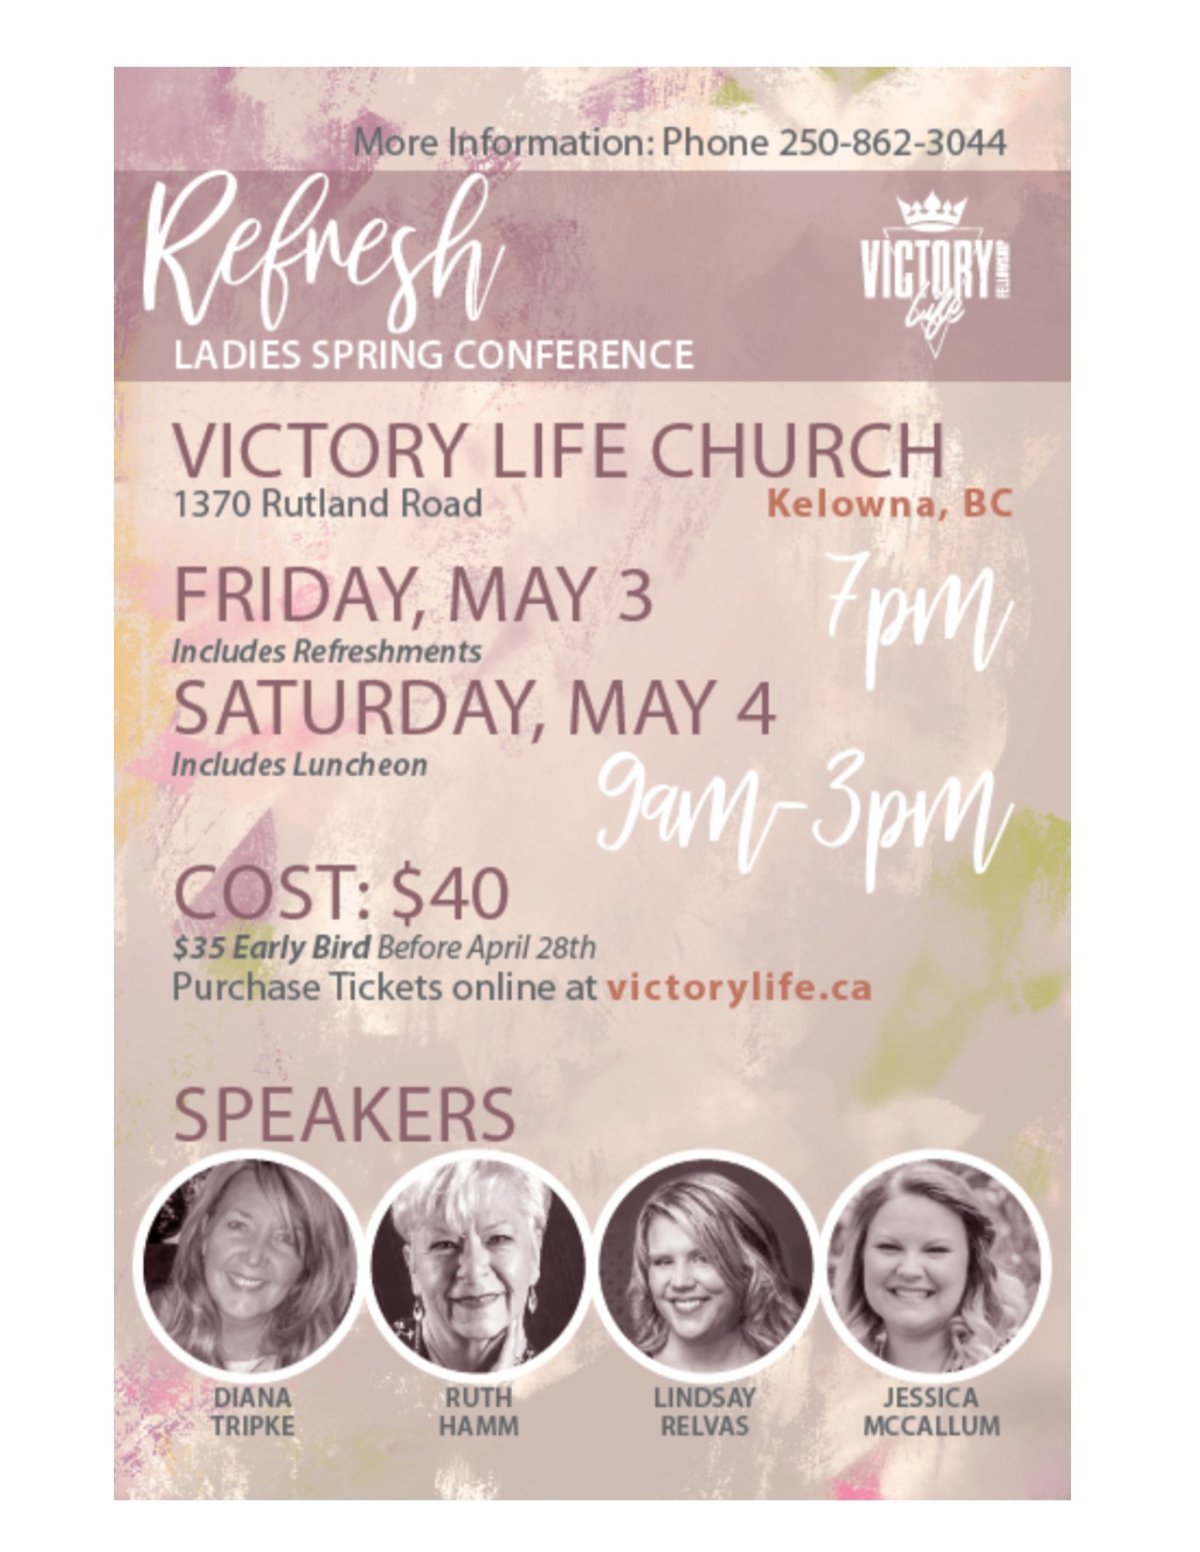 REFRESH LADIES SPRING CONFERENCE - image